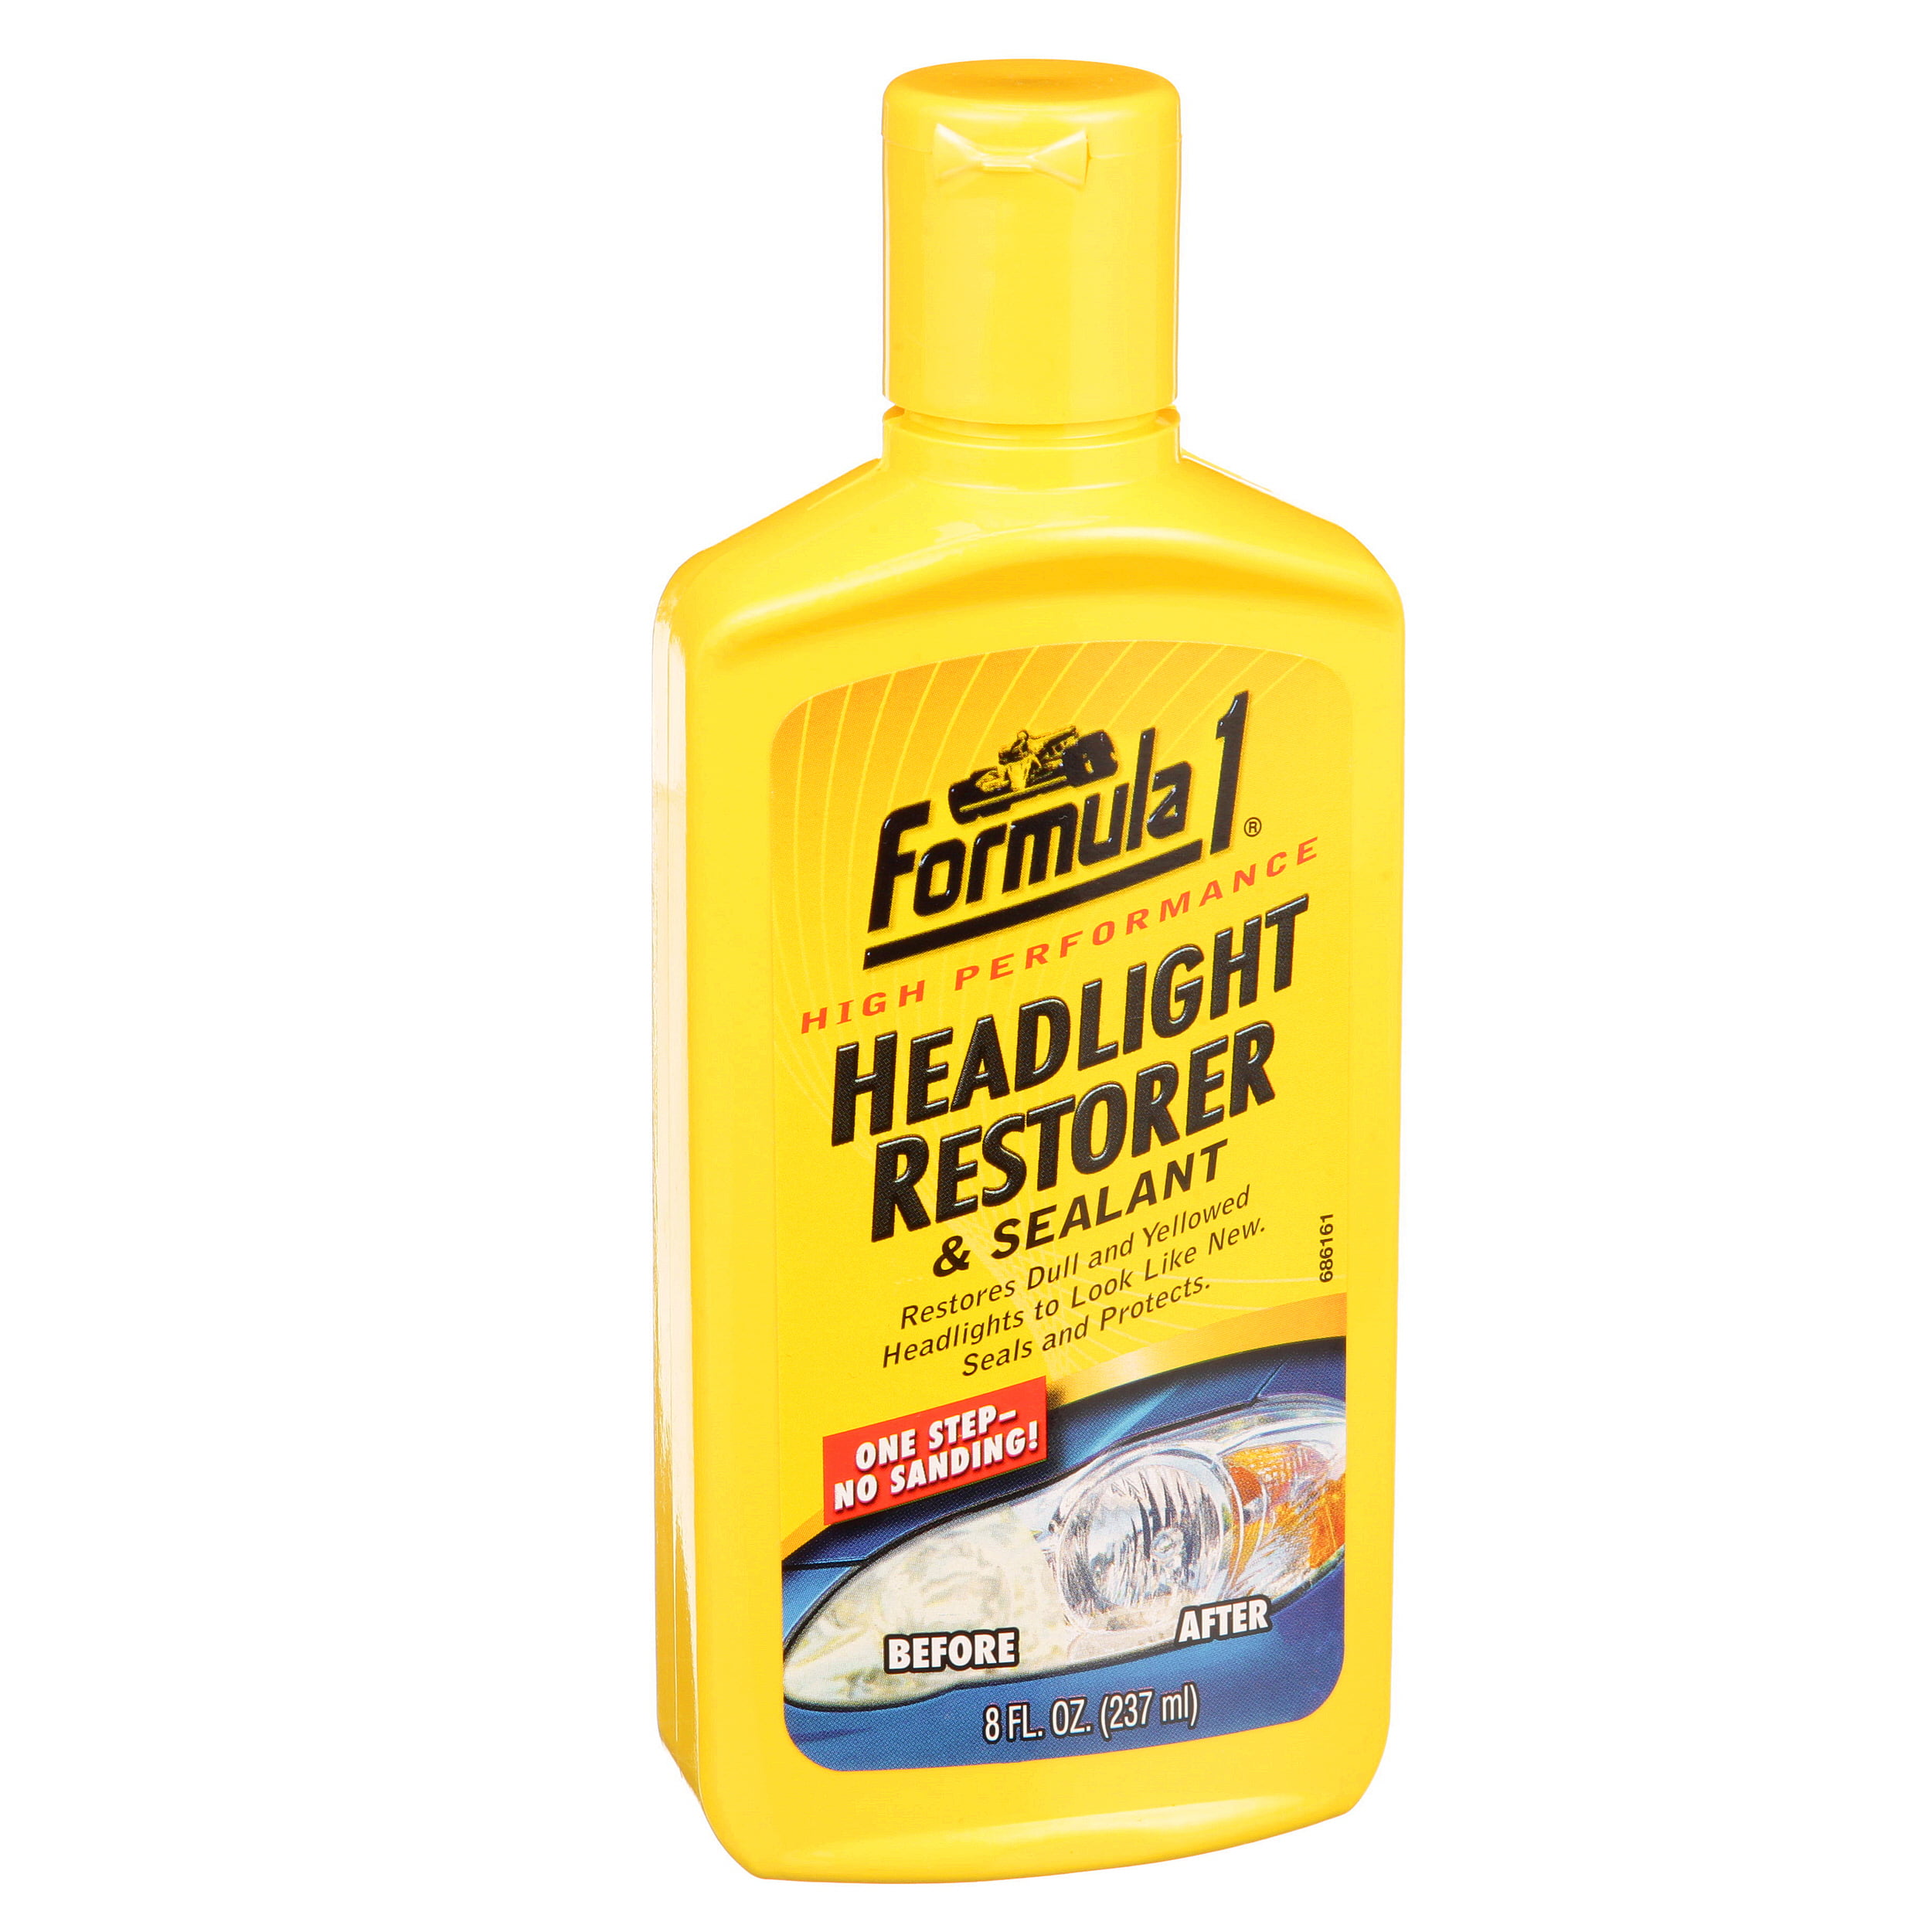 Your Headlights New for 1$ 